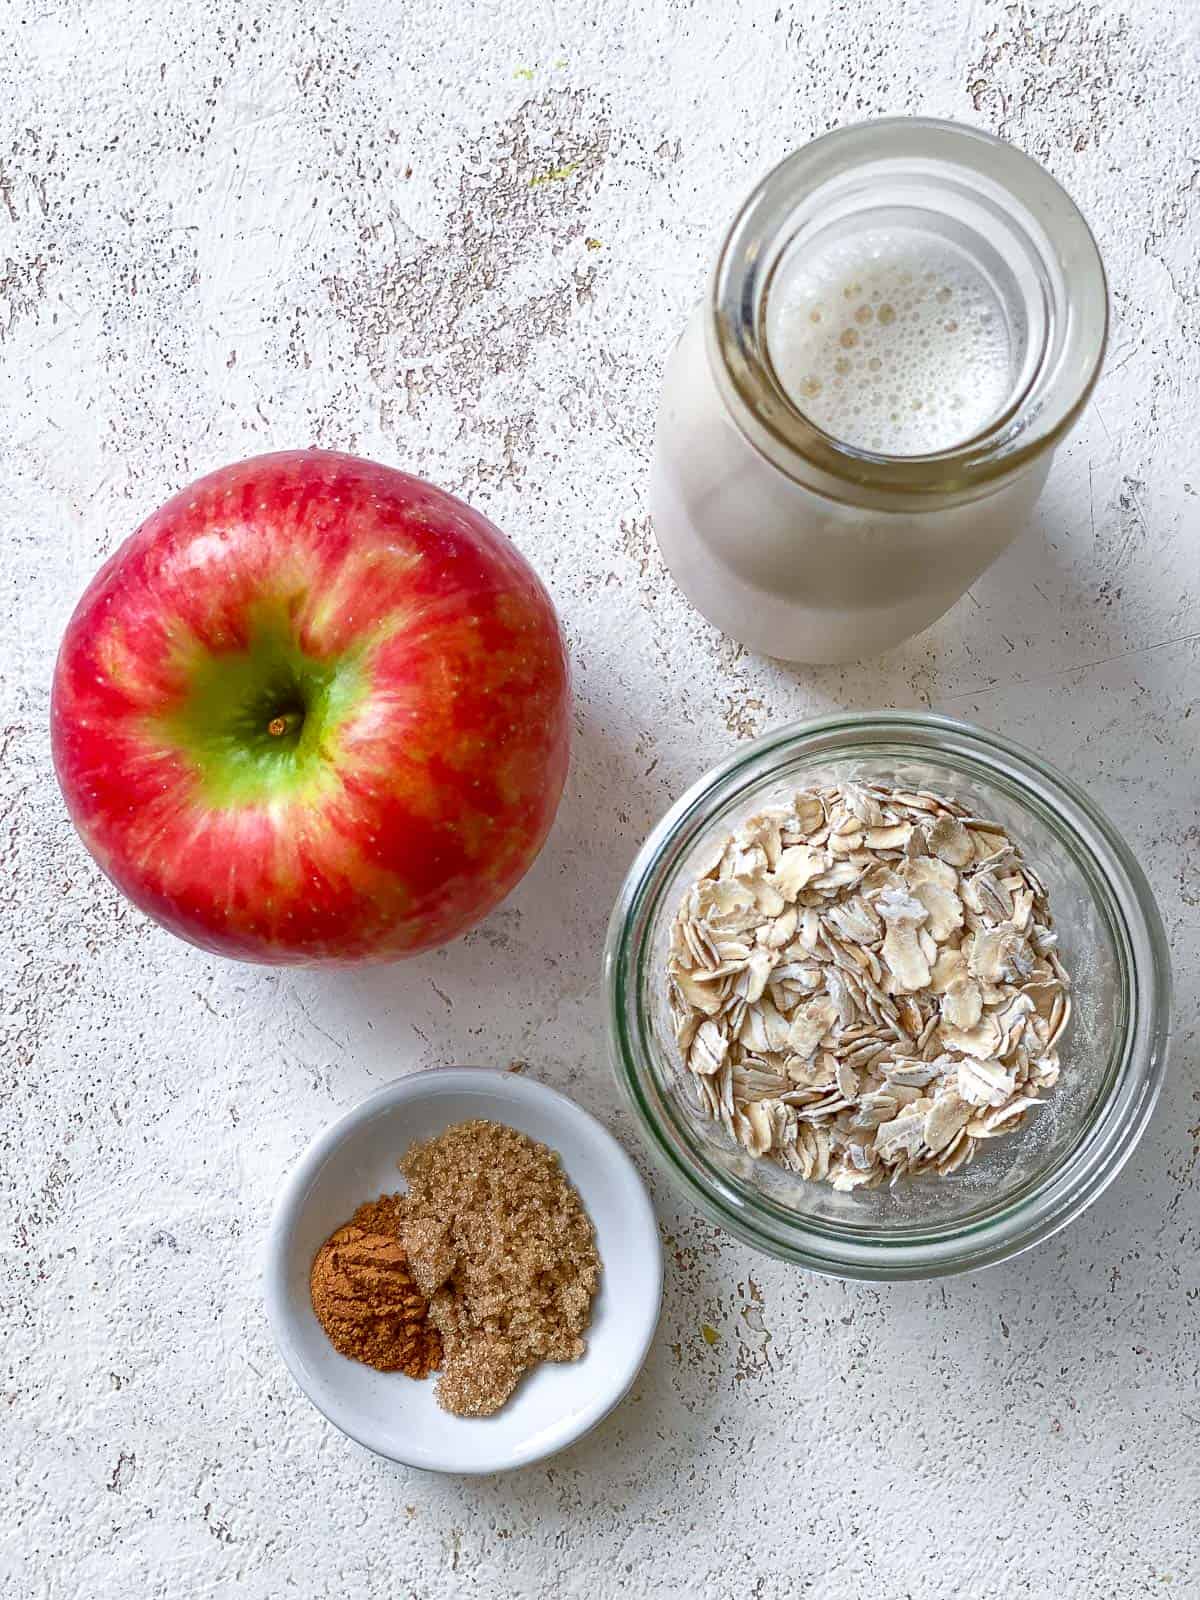 ingredients for Apple Cinnamon Overnight Oats measured out a،nst a white surface